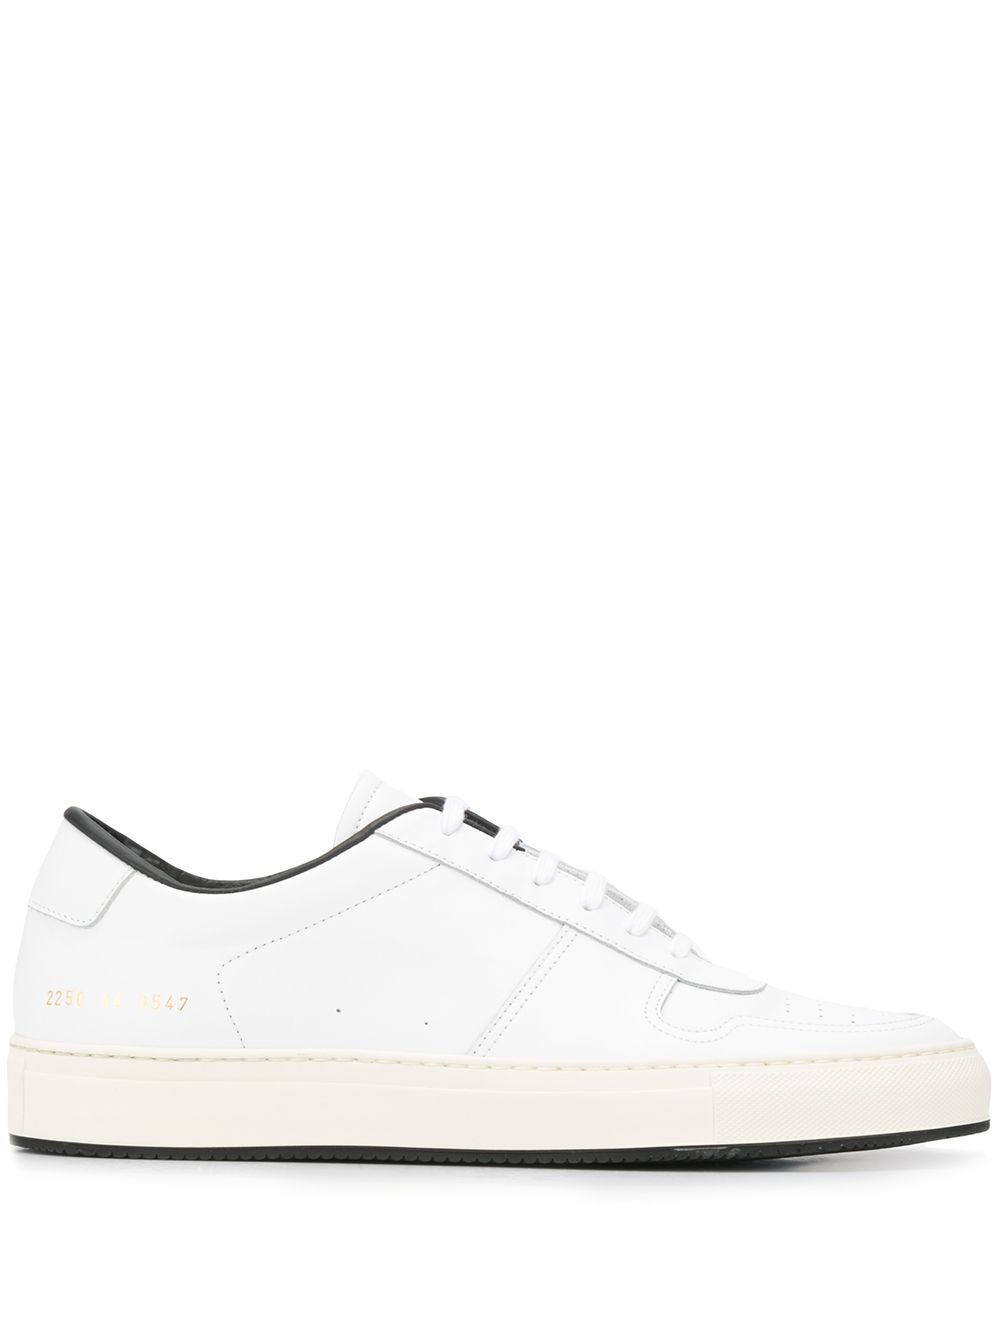 COMMON PROJECTS METALLIC PRINT LACE